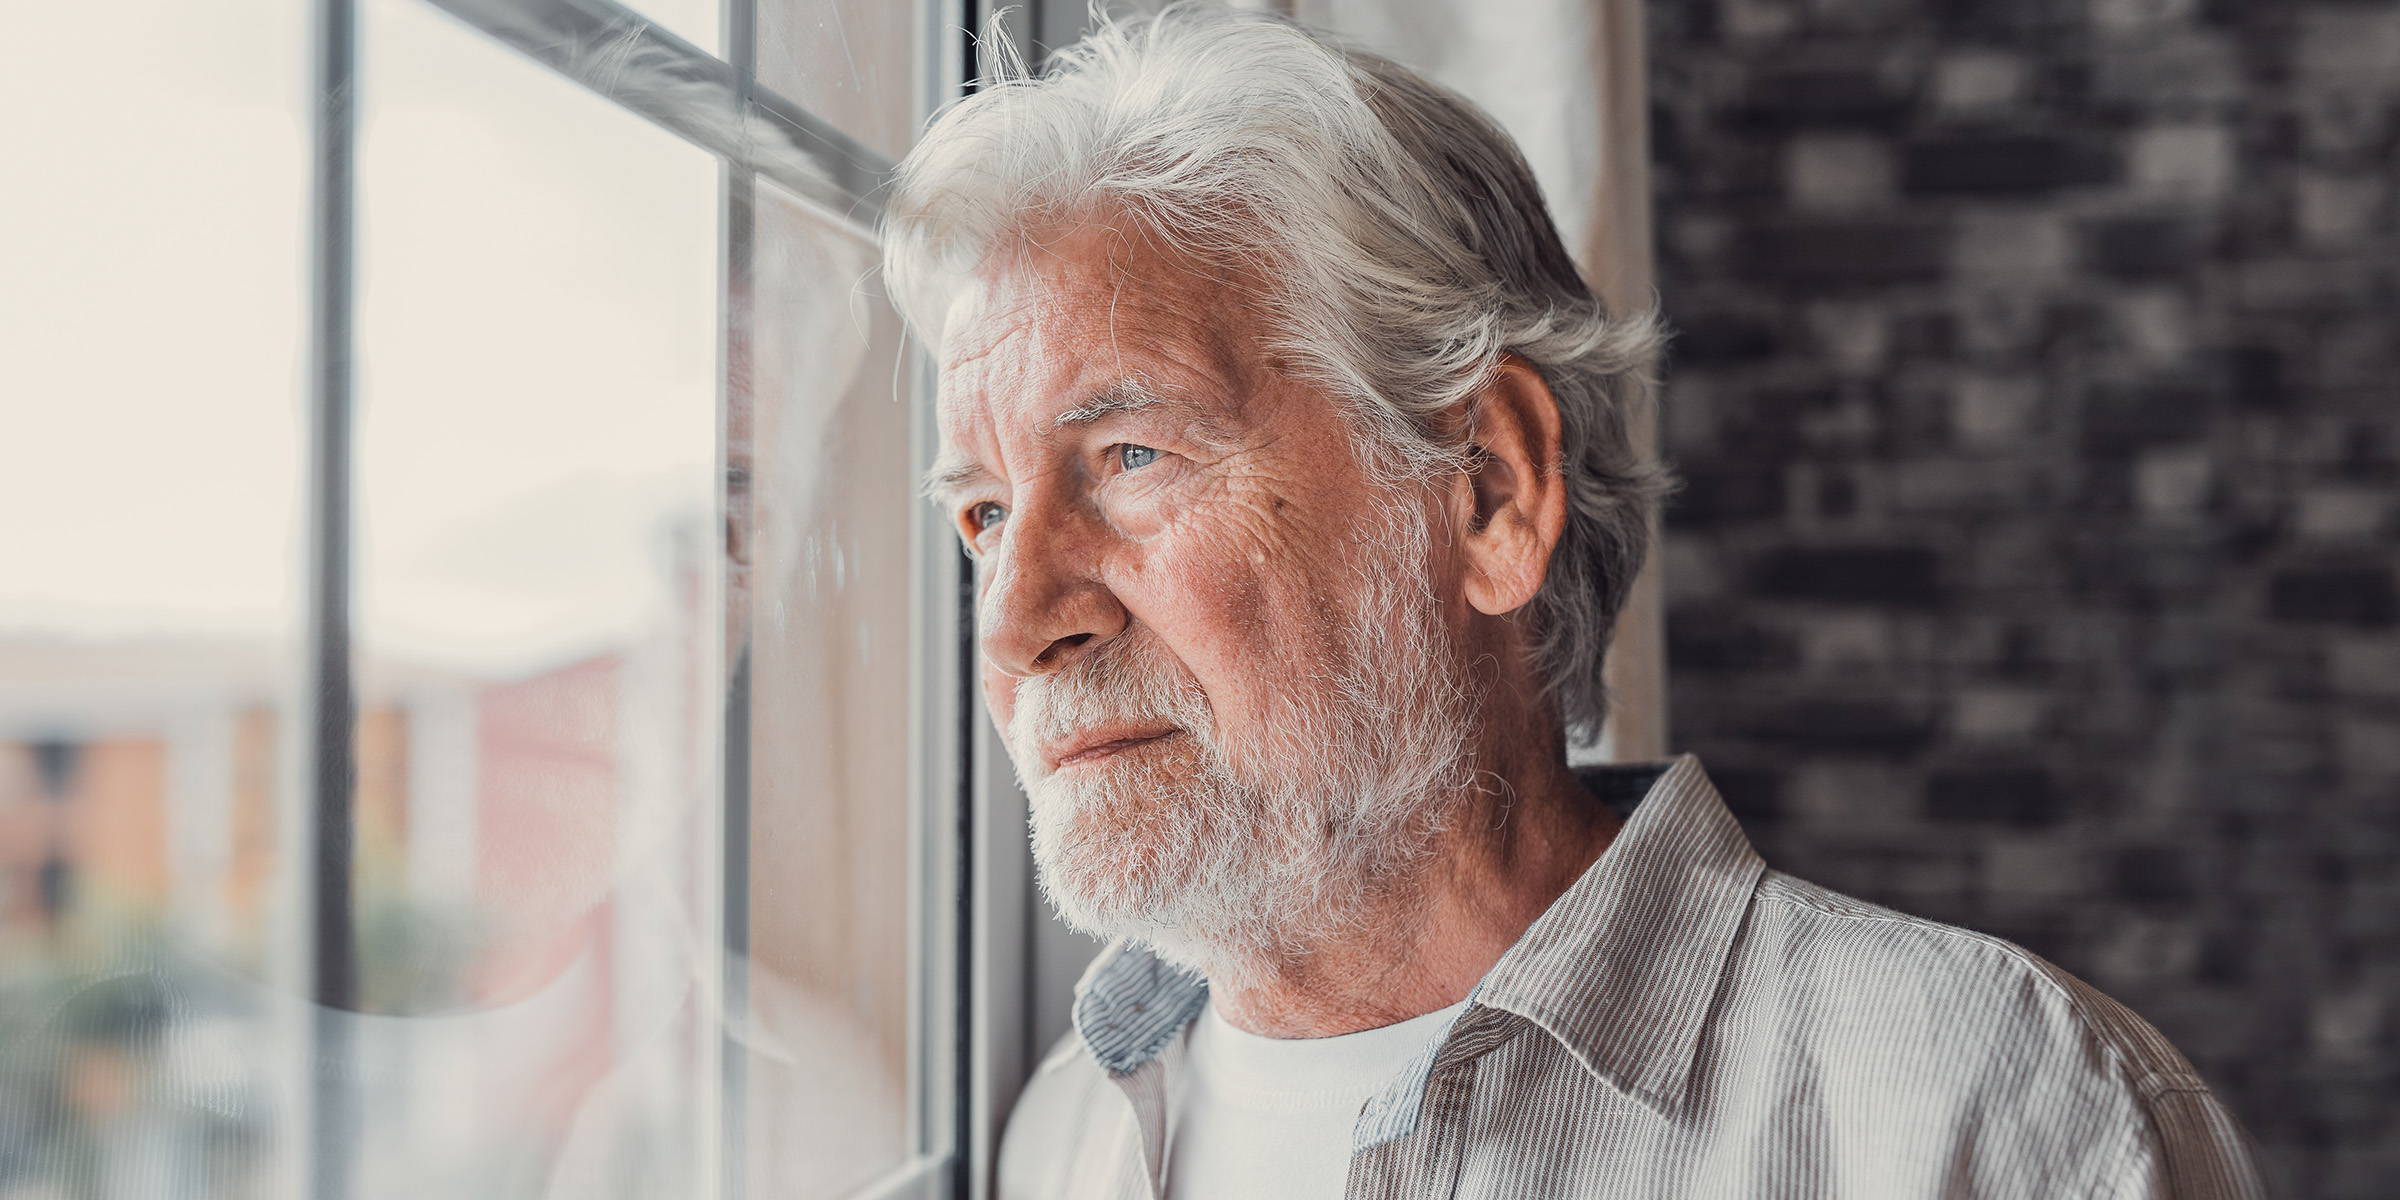 An elderly man standing thoughtfully at a window | Source: Amomama